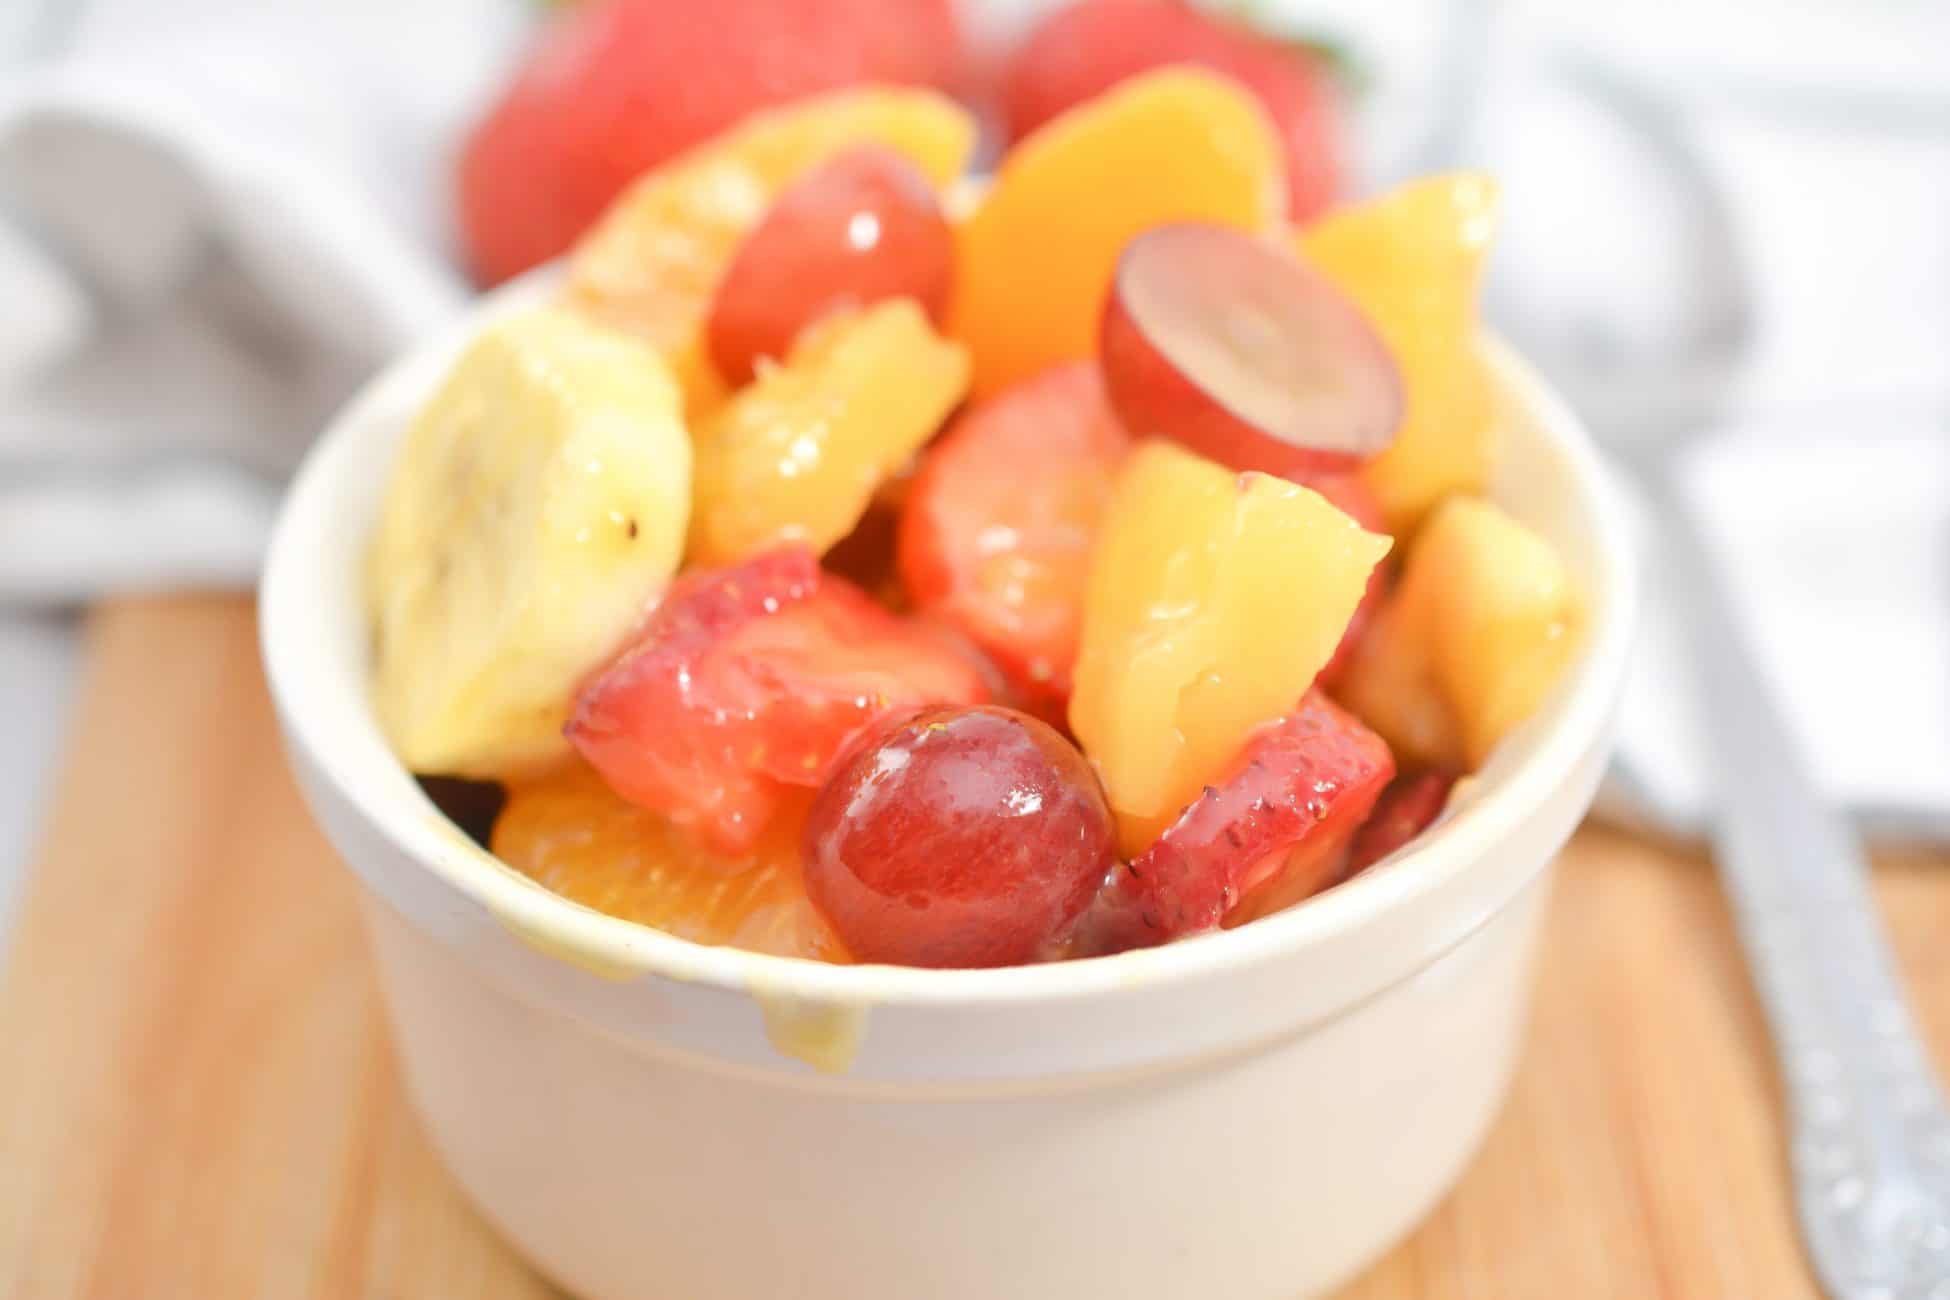 Fruit Salad to Die For